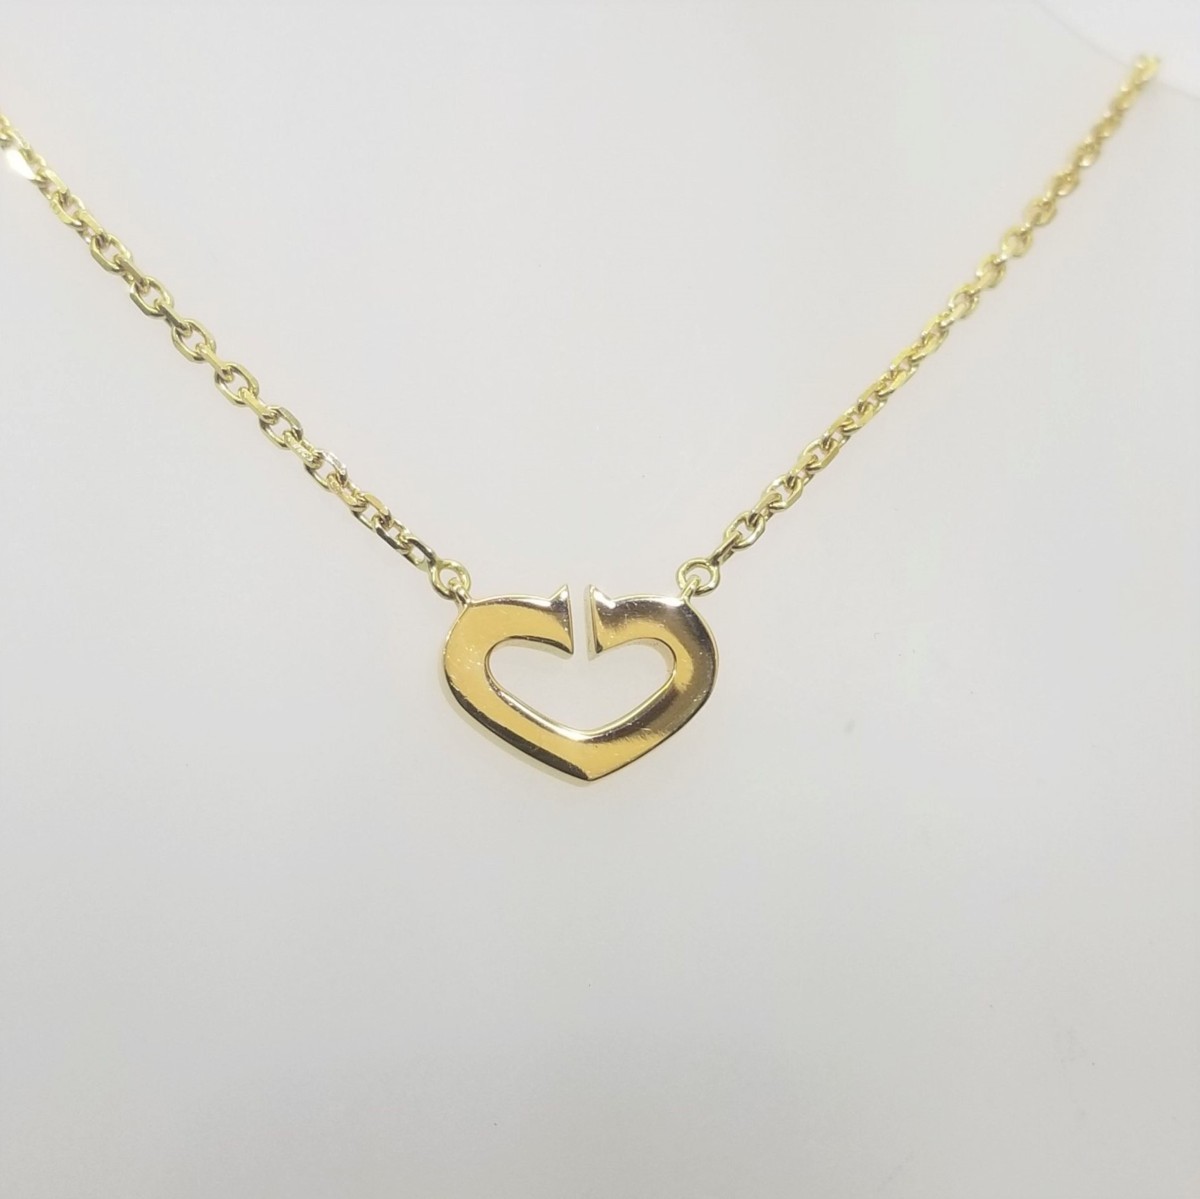  Cartier Cartier ultimate beautiful goods C Heart diamond pendant necklace 18 gold 750 YG box guarantee attached yellow gold jewelry 